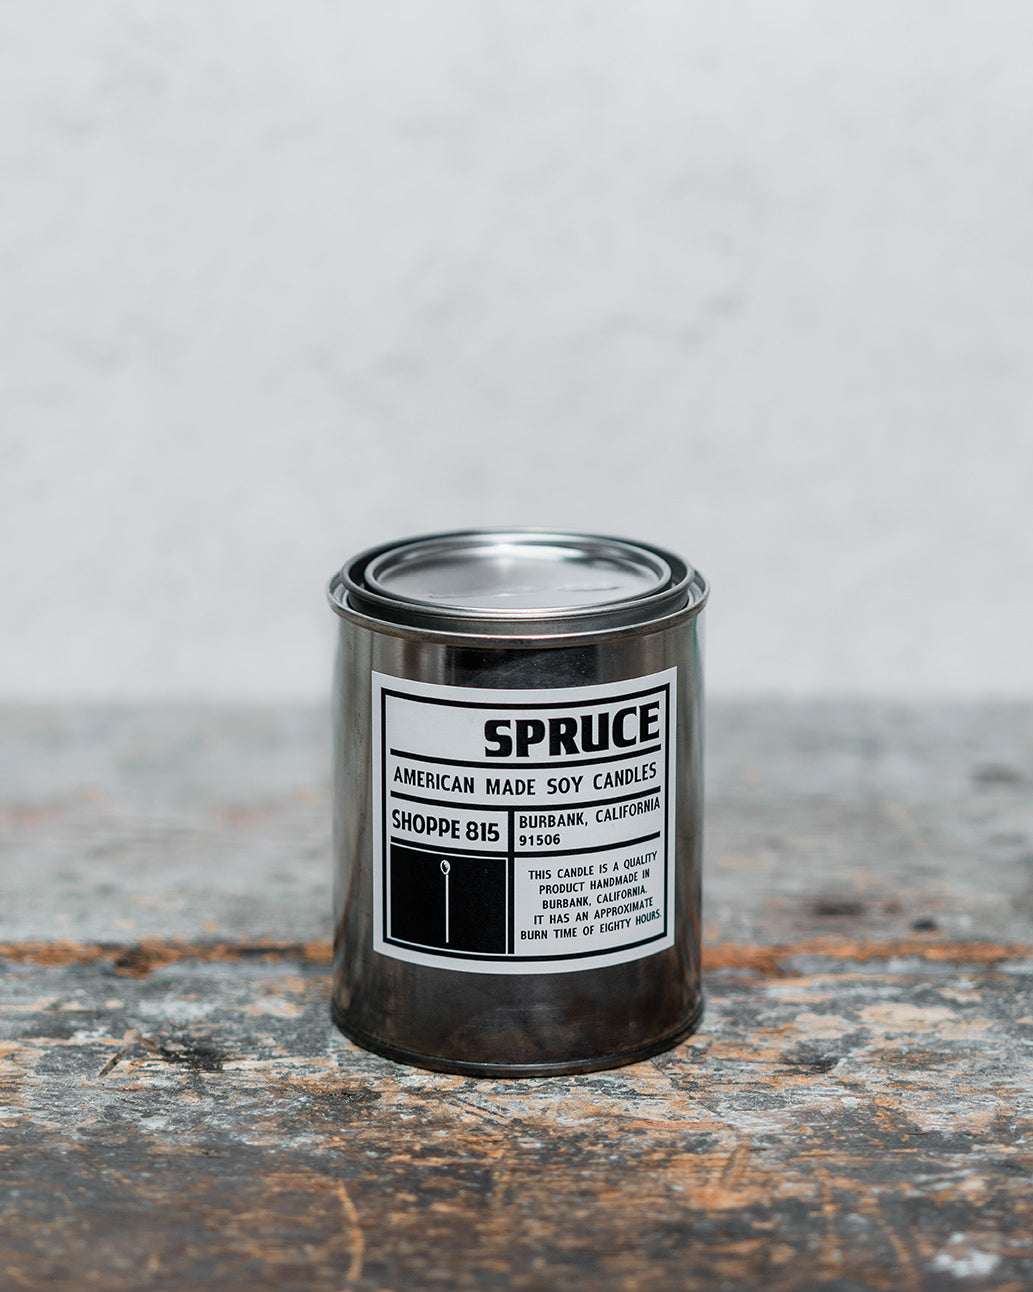 Spruce gender neutral tin candle on wooden shelf